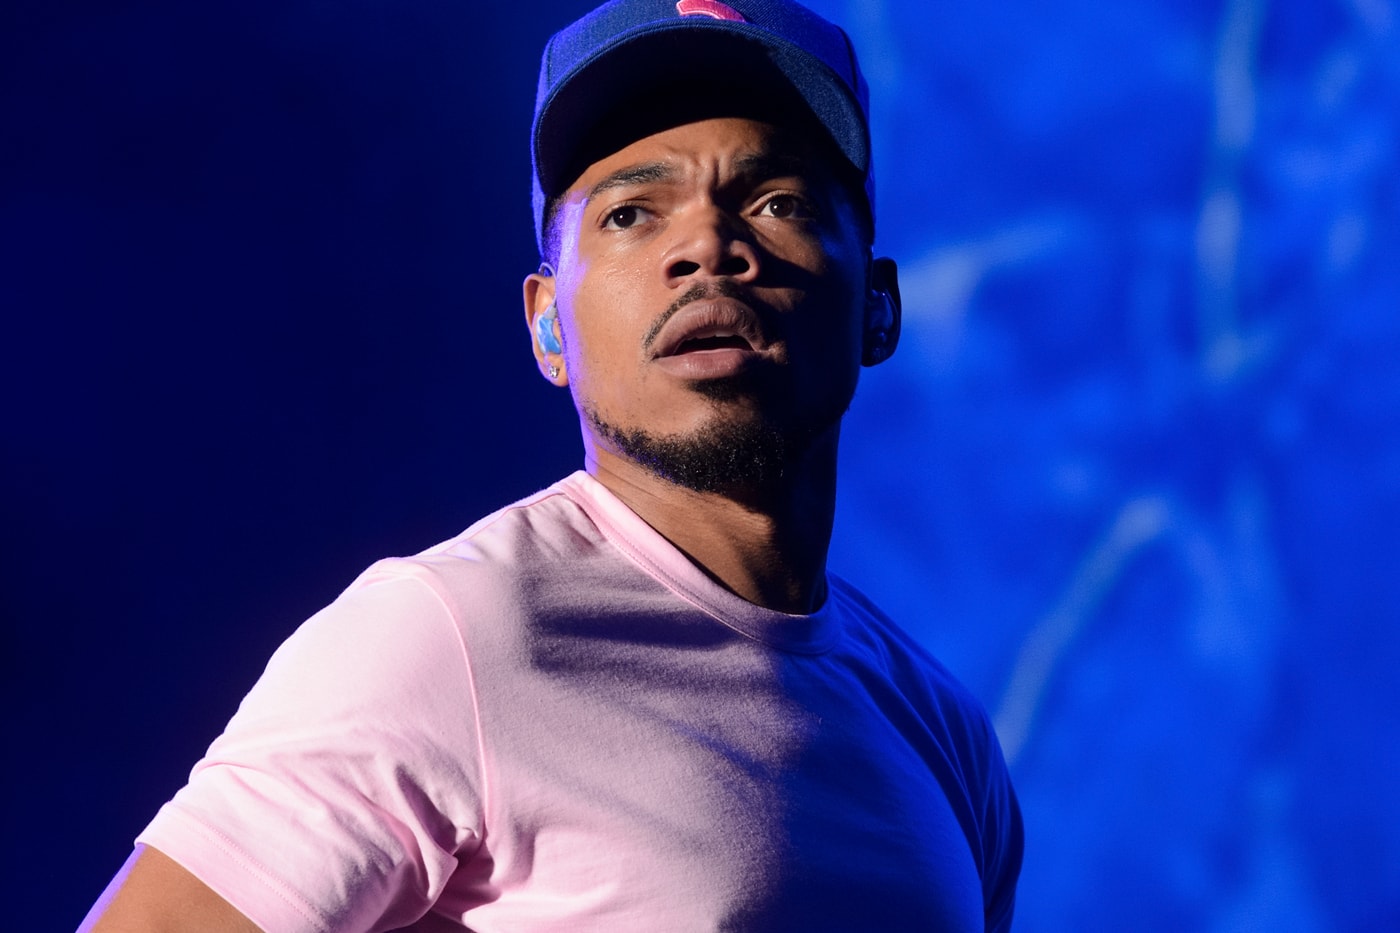 Chance the Rapper "Publicly Disrespecting" Dr. Dre & Aftermath